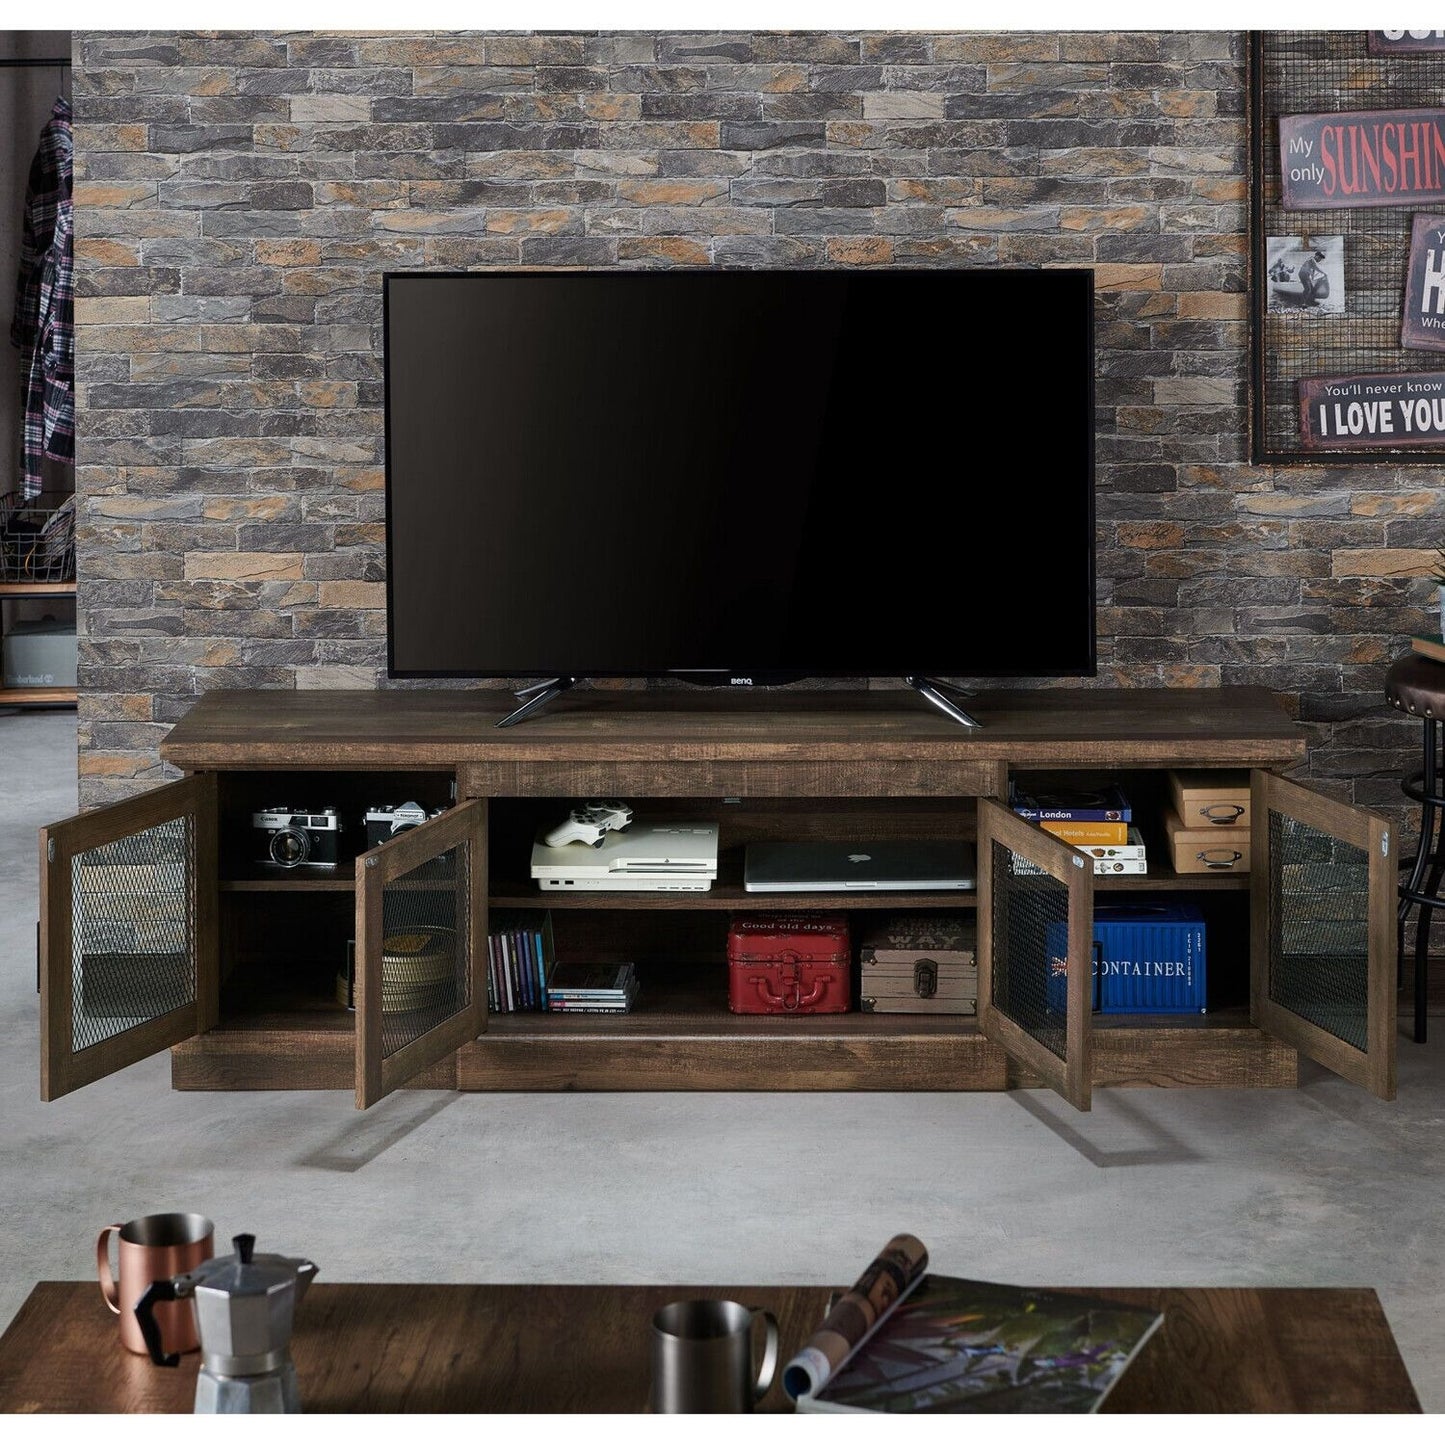 Reclaimed Oak Finish Rustic Style TV Stand Entertainment Center 5.6ft Wide